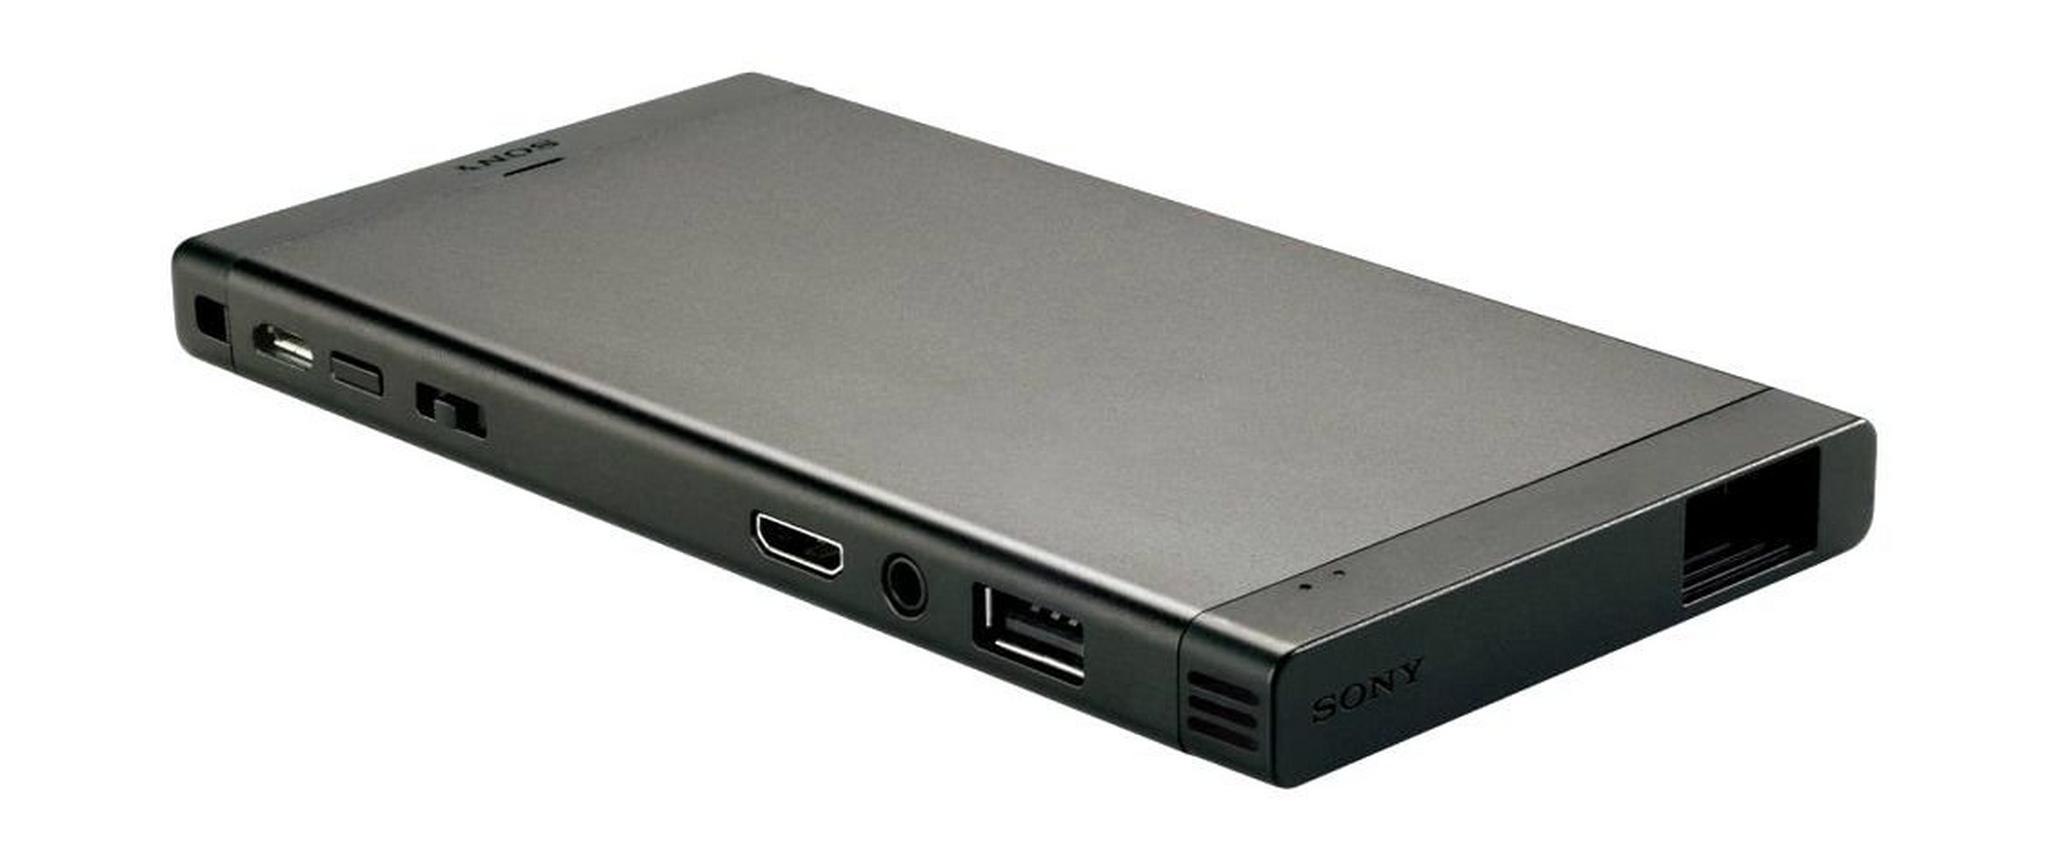 Sony Portable HD Mobile Projector, Wi-Fi or HDMI Connectivity & screen size up to 120 inches (MPCL1)